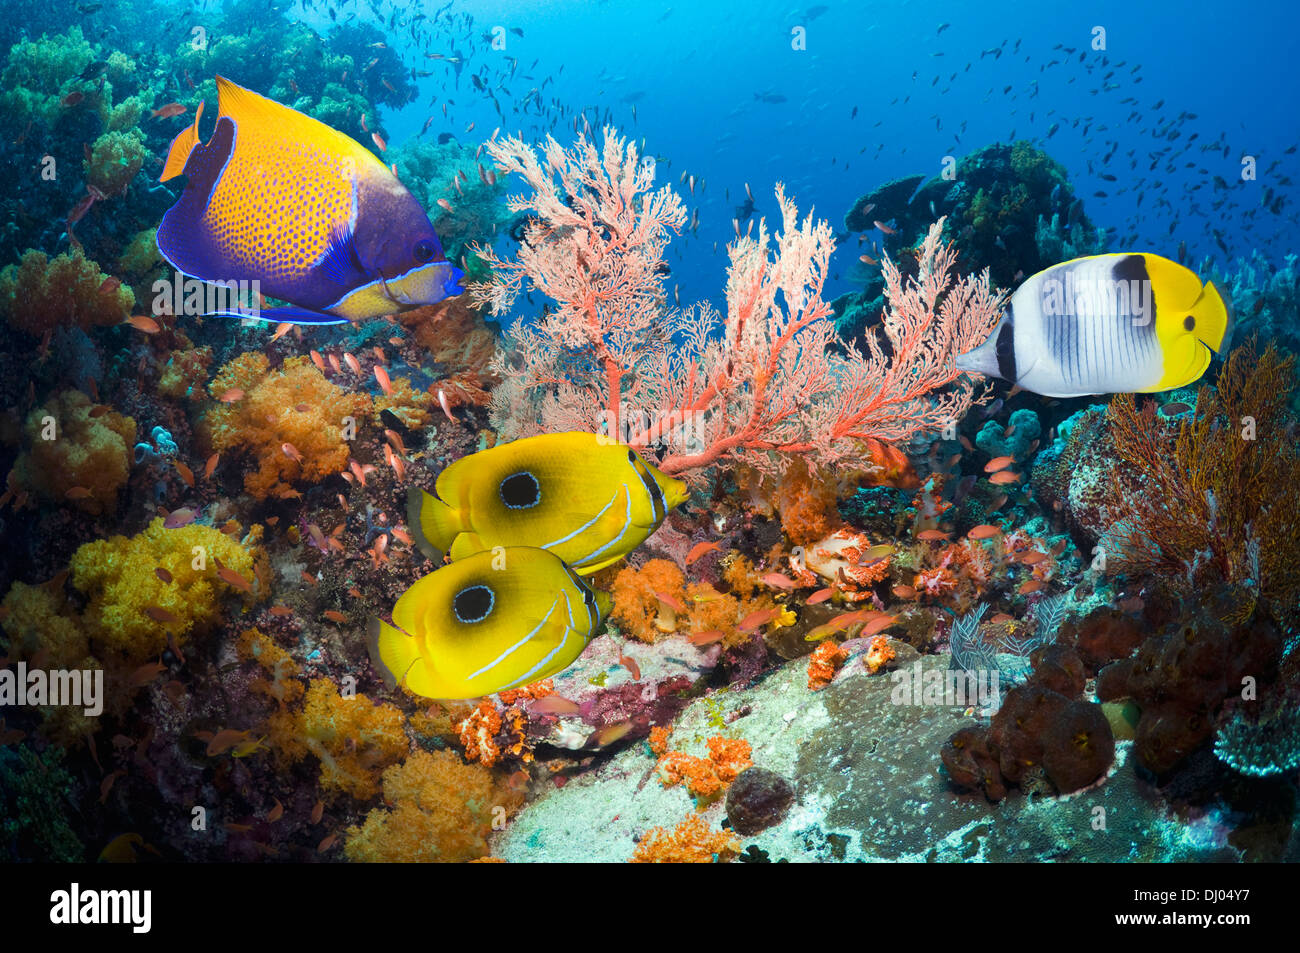 Blue-girdled angelfish and Bennett's butterflyfish over coral reef with gorgonian, soft corals and Lyretail anthias Stock Photo